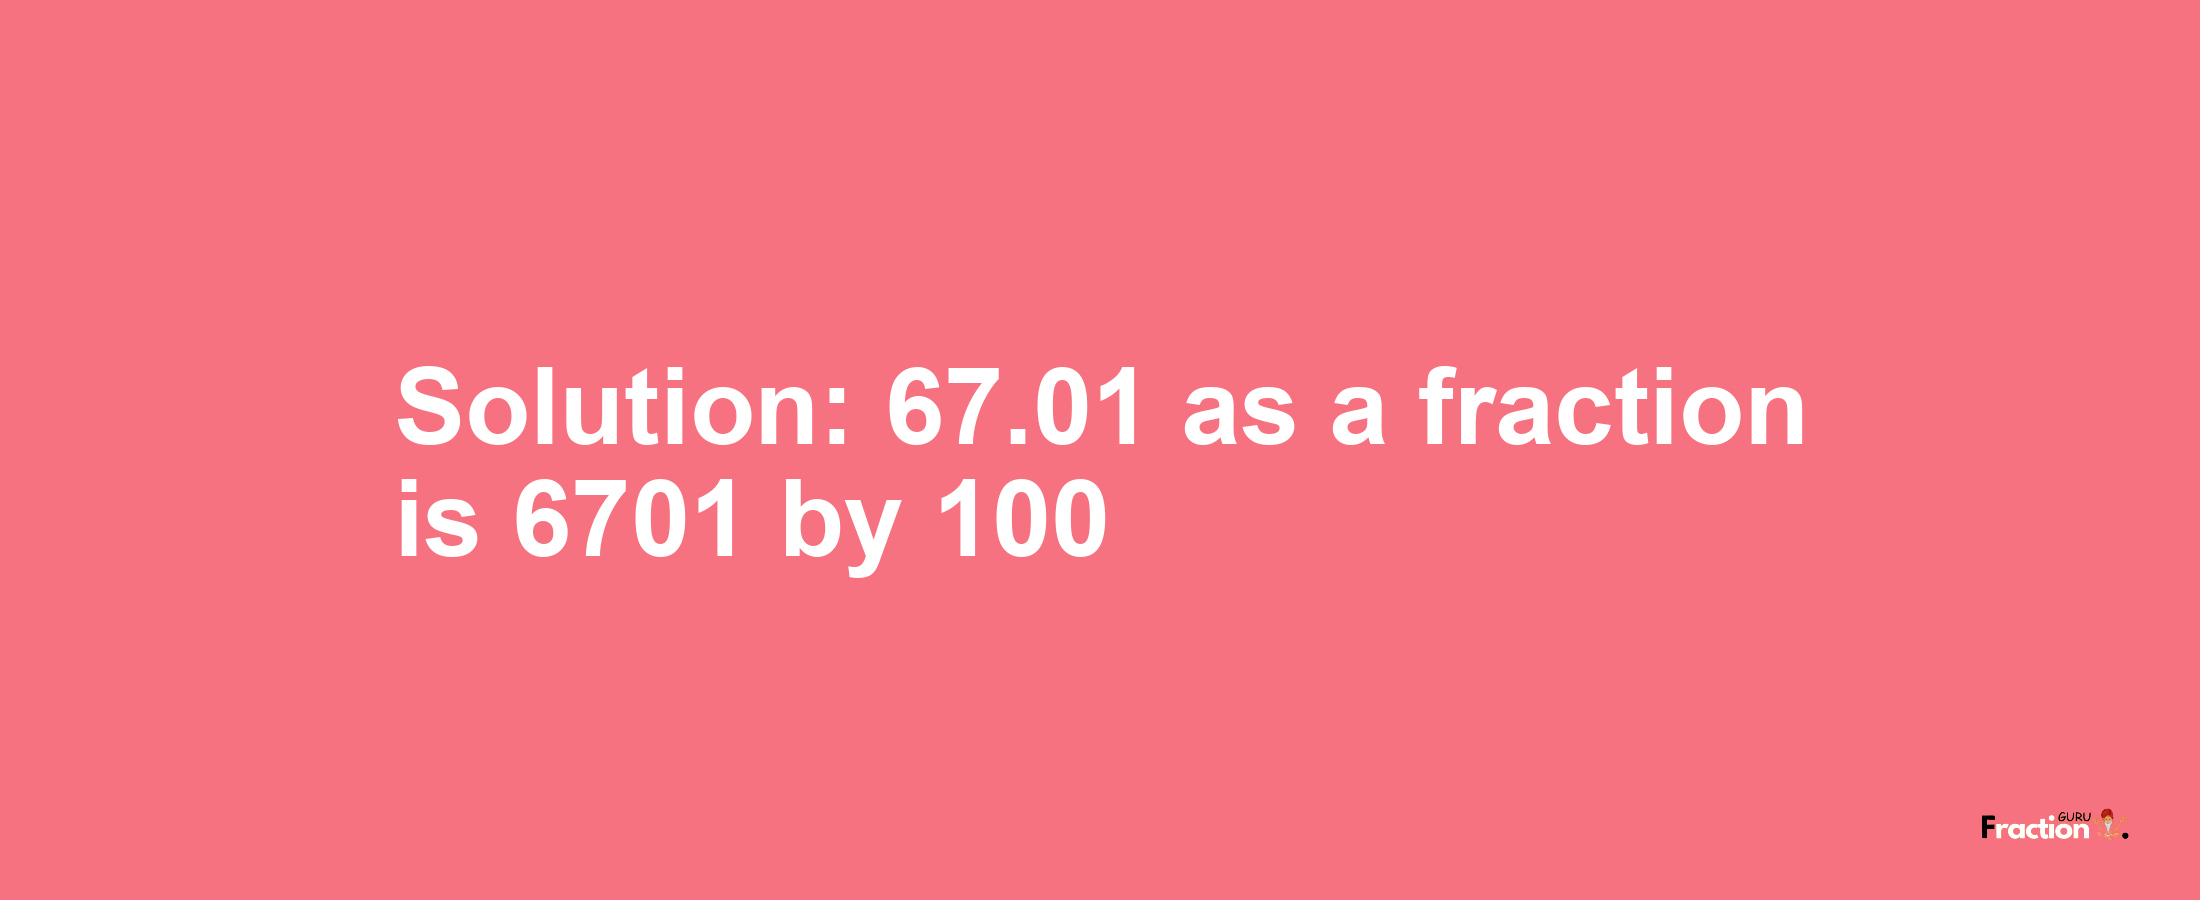 Solution:67.01 as a fraction is 6701/100